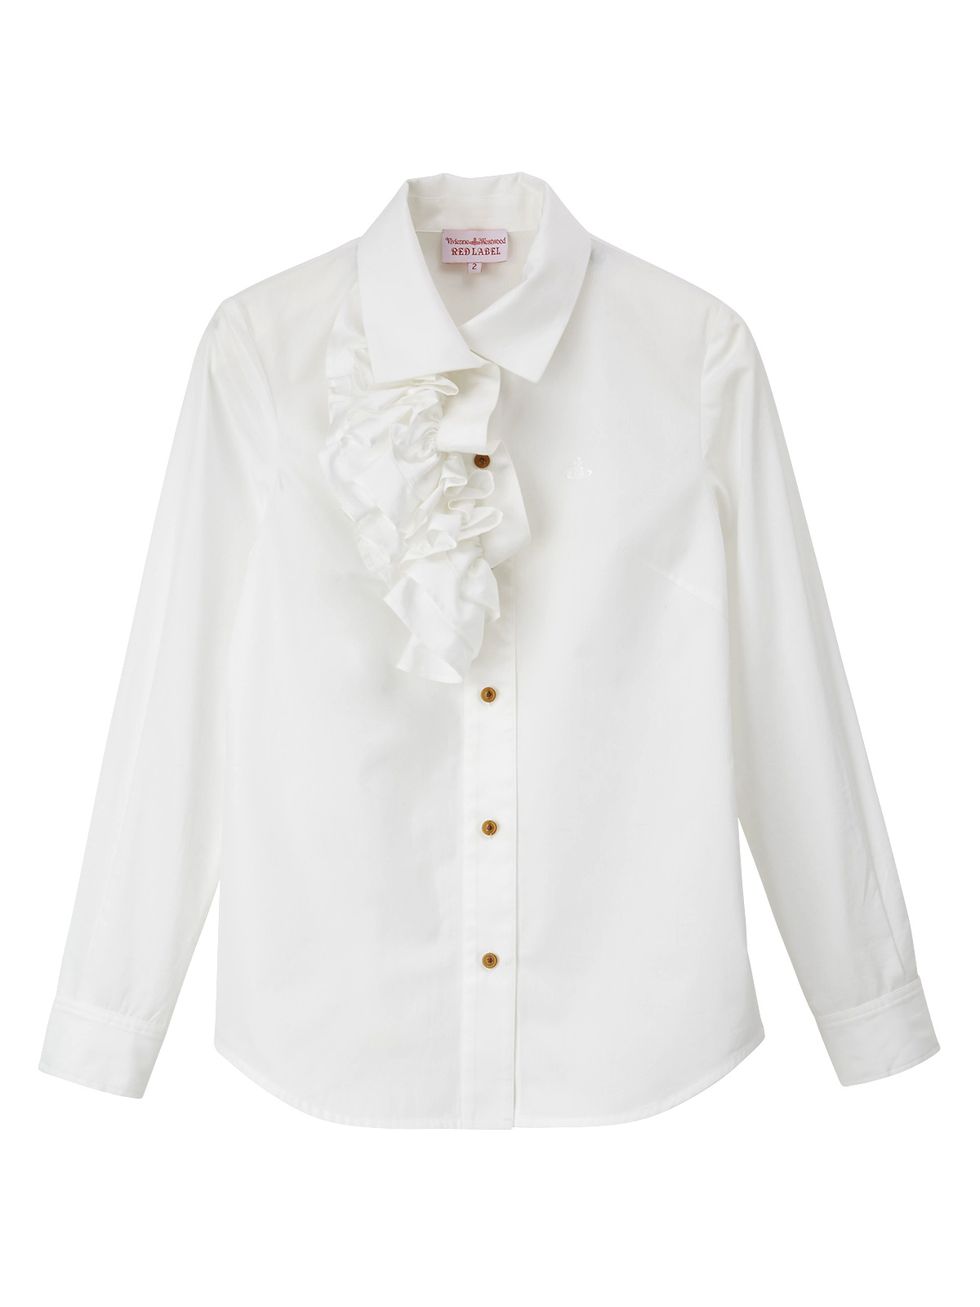 Clothing, Product, Dress shirt, Collar, Sleeve, Textile, White, Pattern, Fashion, Button, 